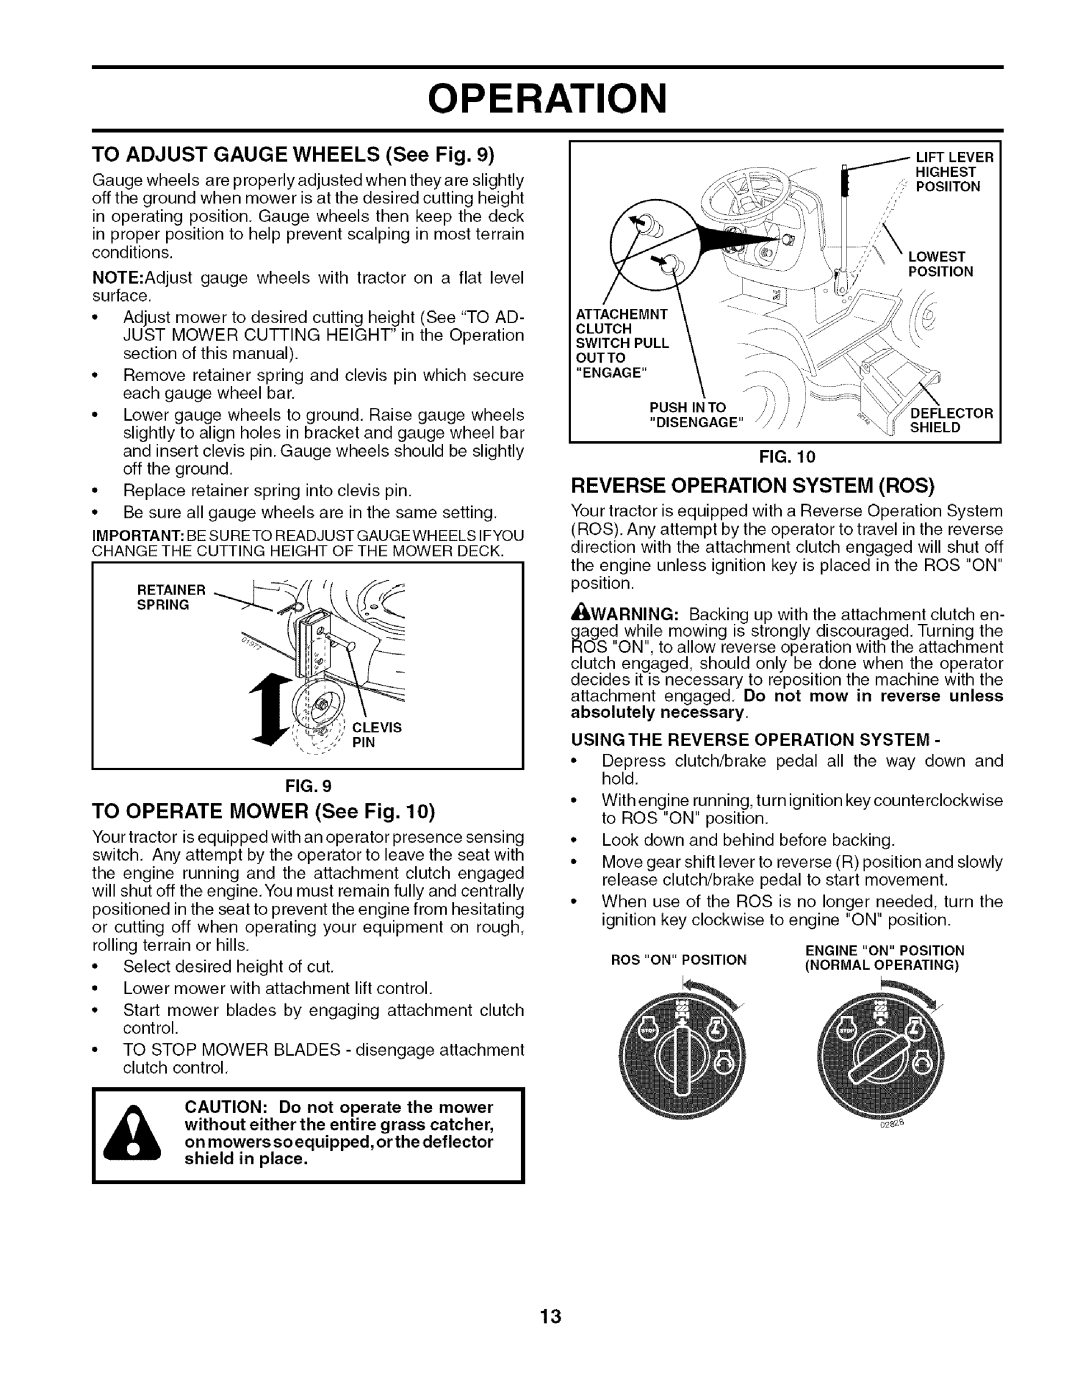 Husqvarna 917.27909 owner manual To Adjust Gauge Wheels See Fig, To Operate Mower See Fig, Reverse Operation System ROS 